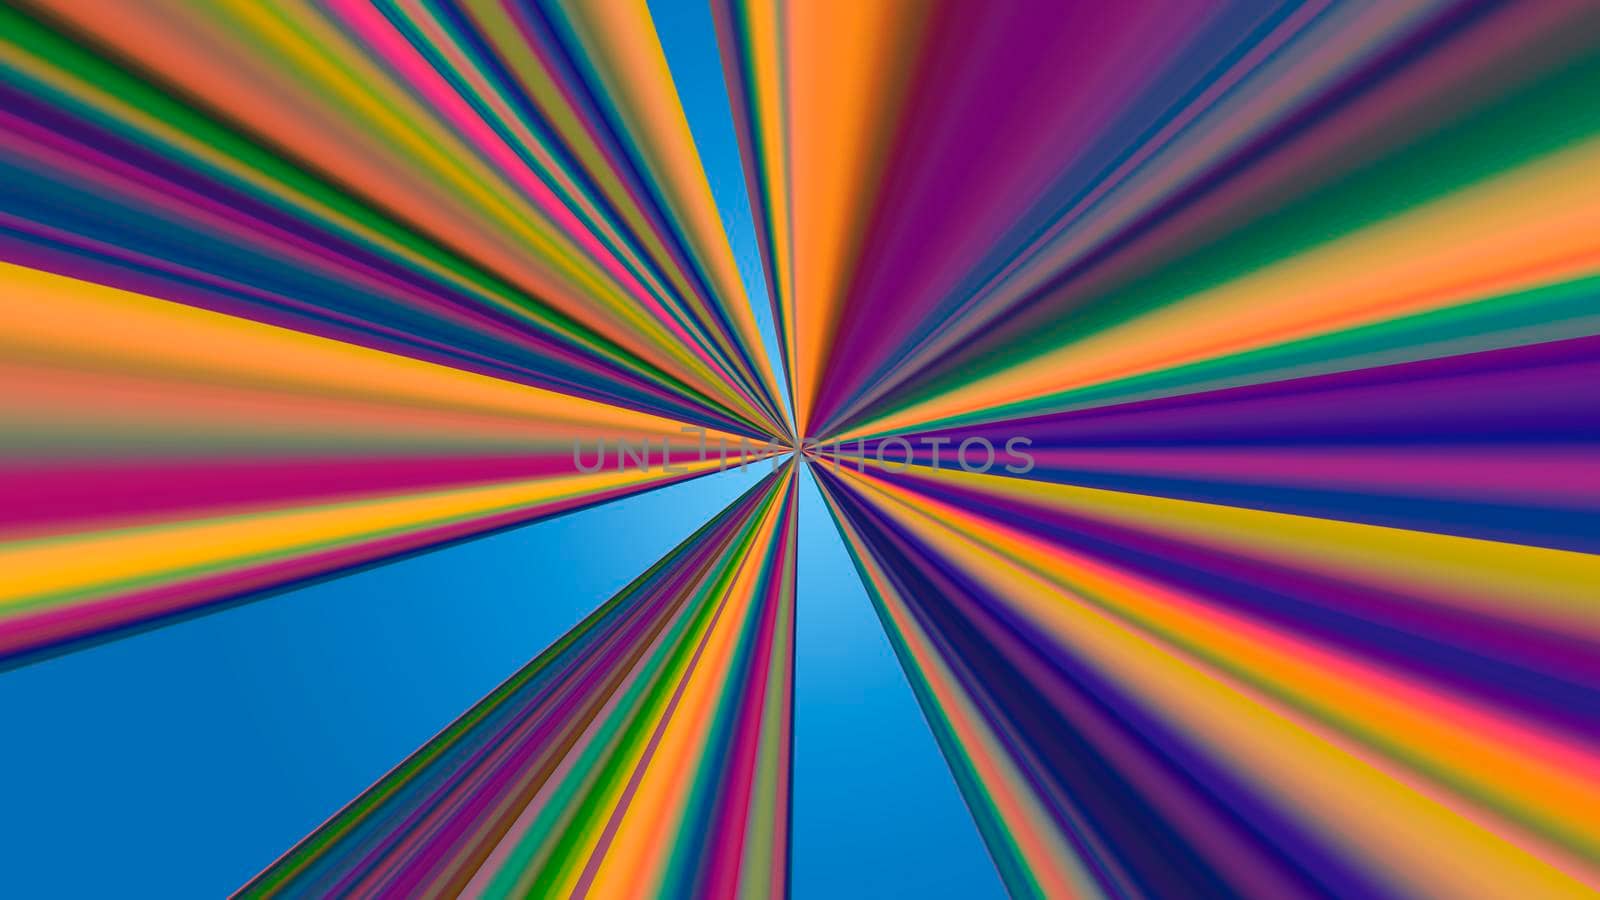 Abstract gradient multicolored linear background by Vvicca